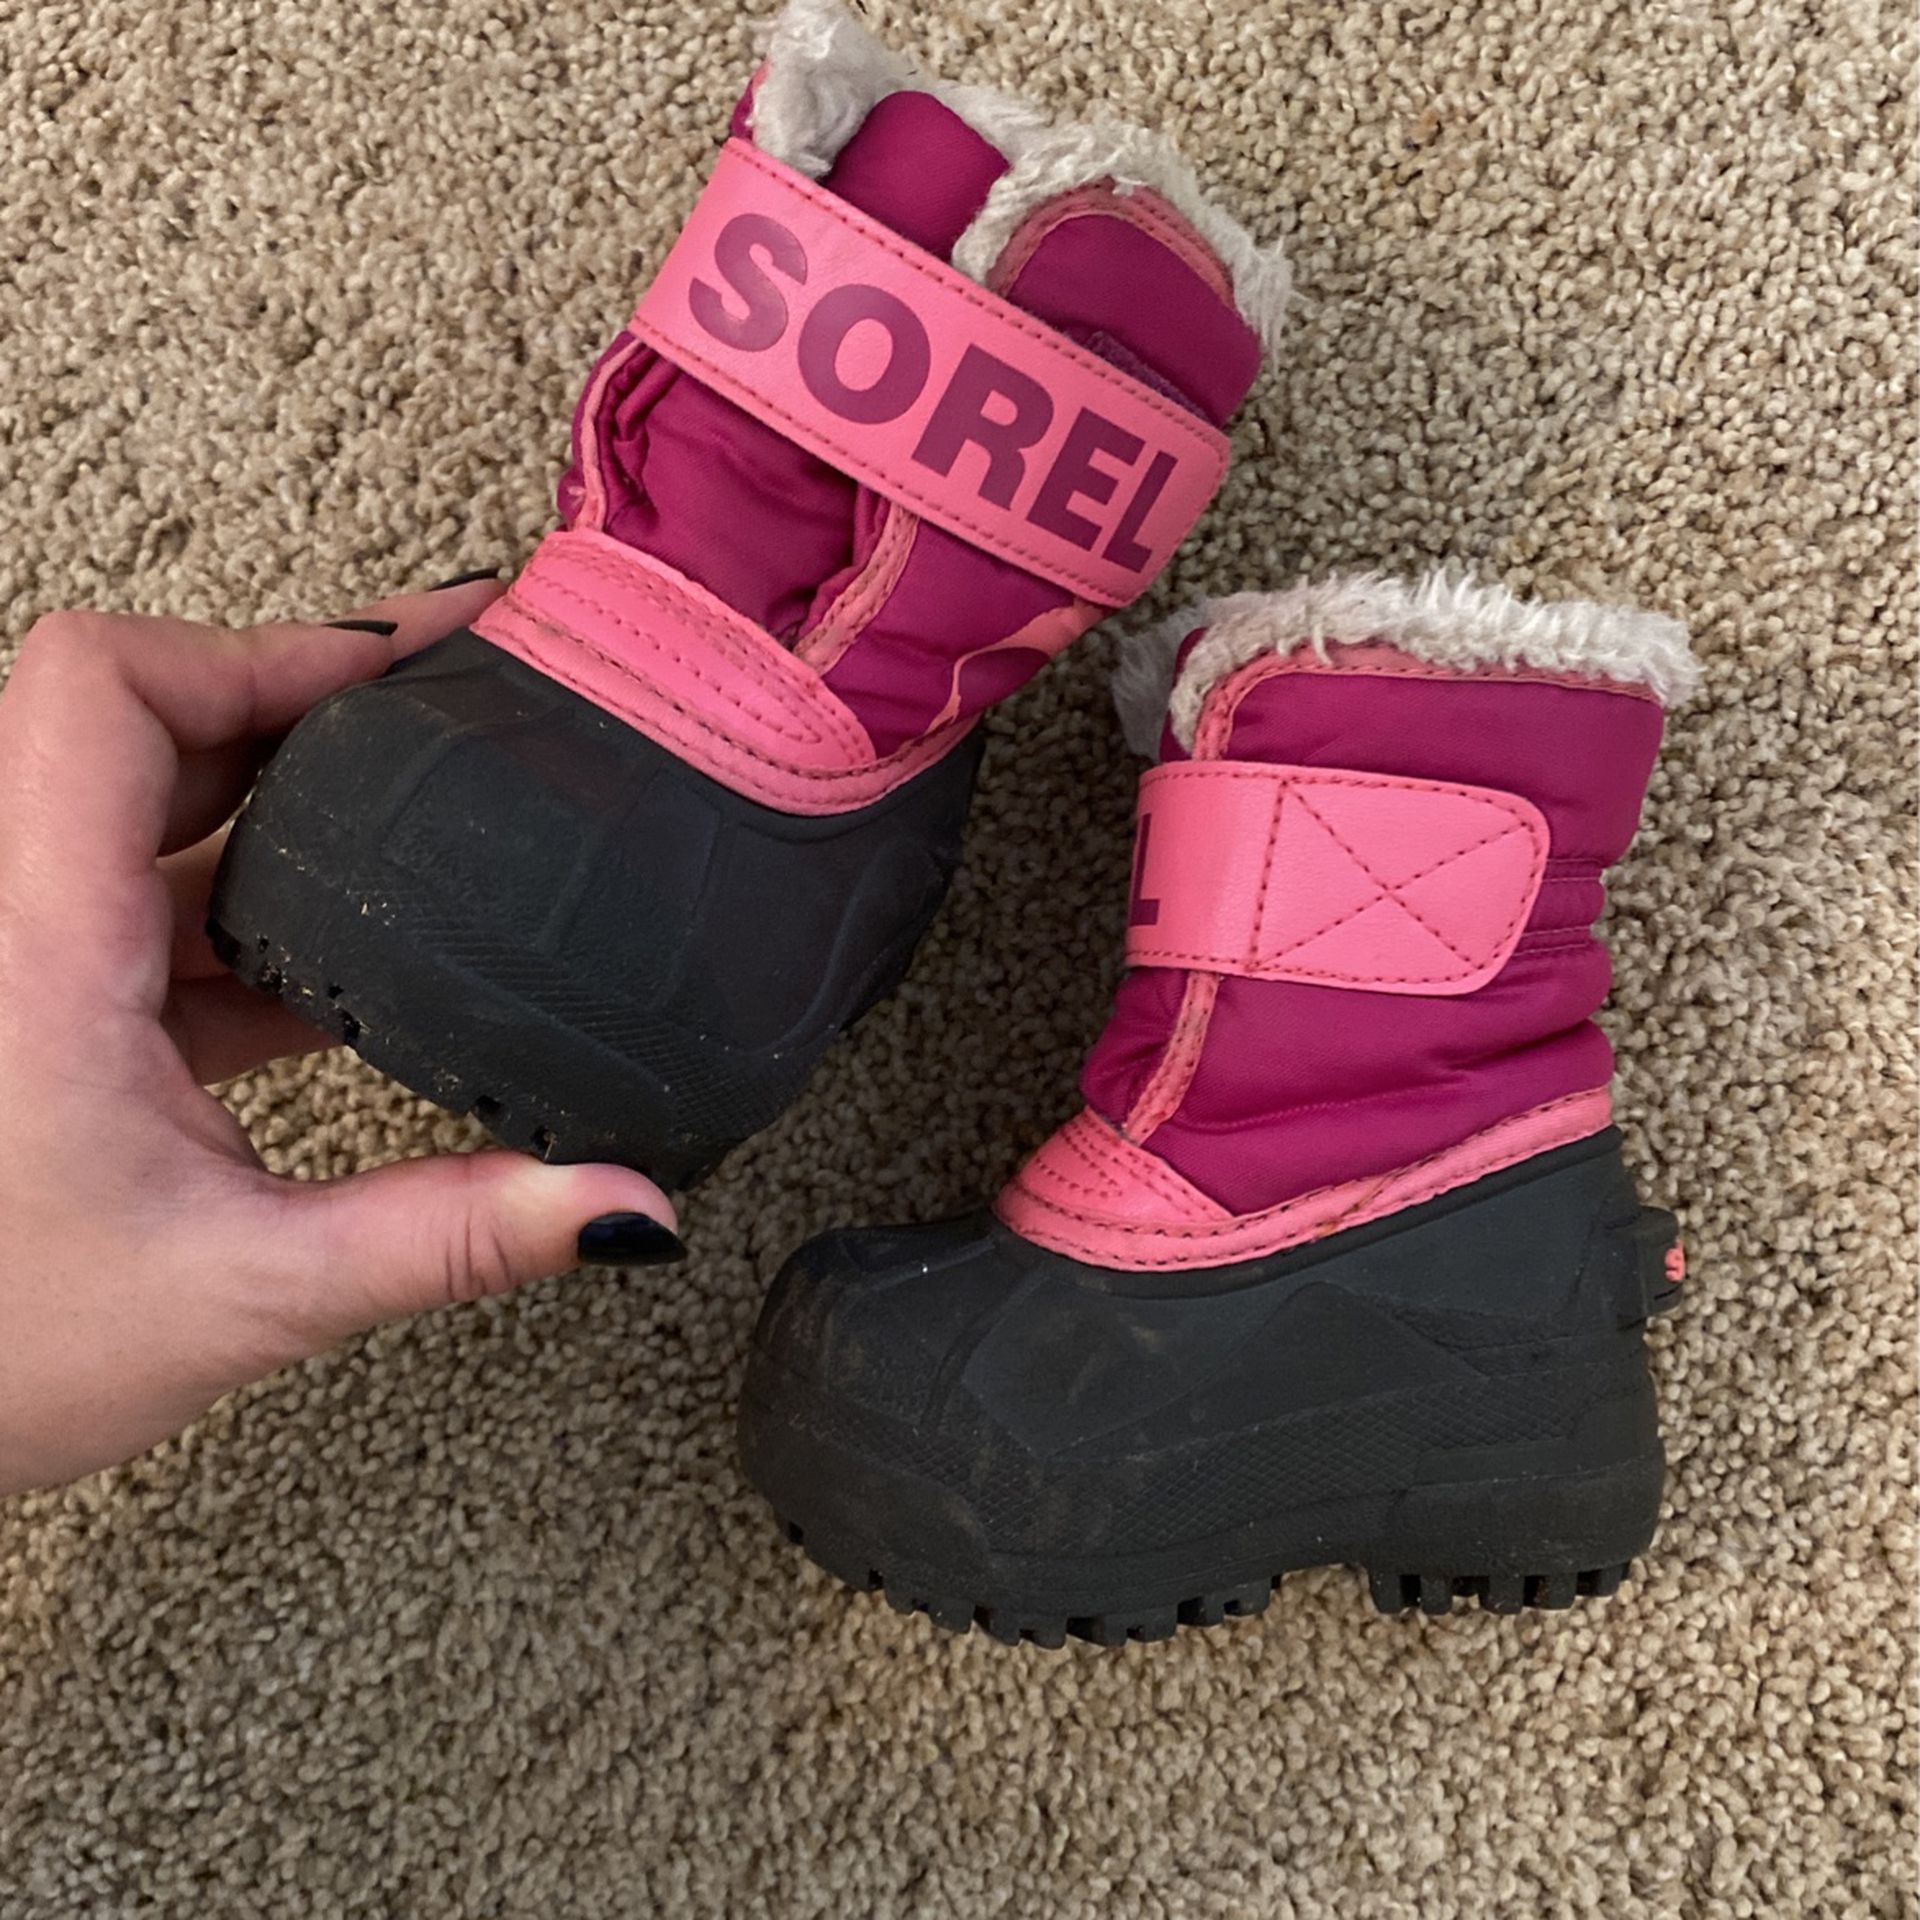 Snow Boots Size 3 Baby/toddler